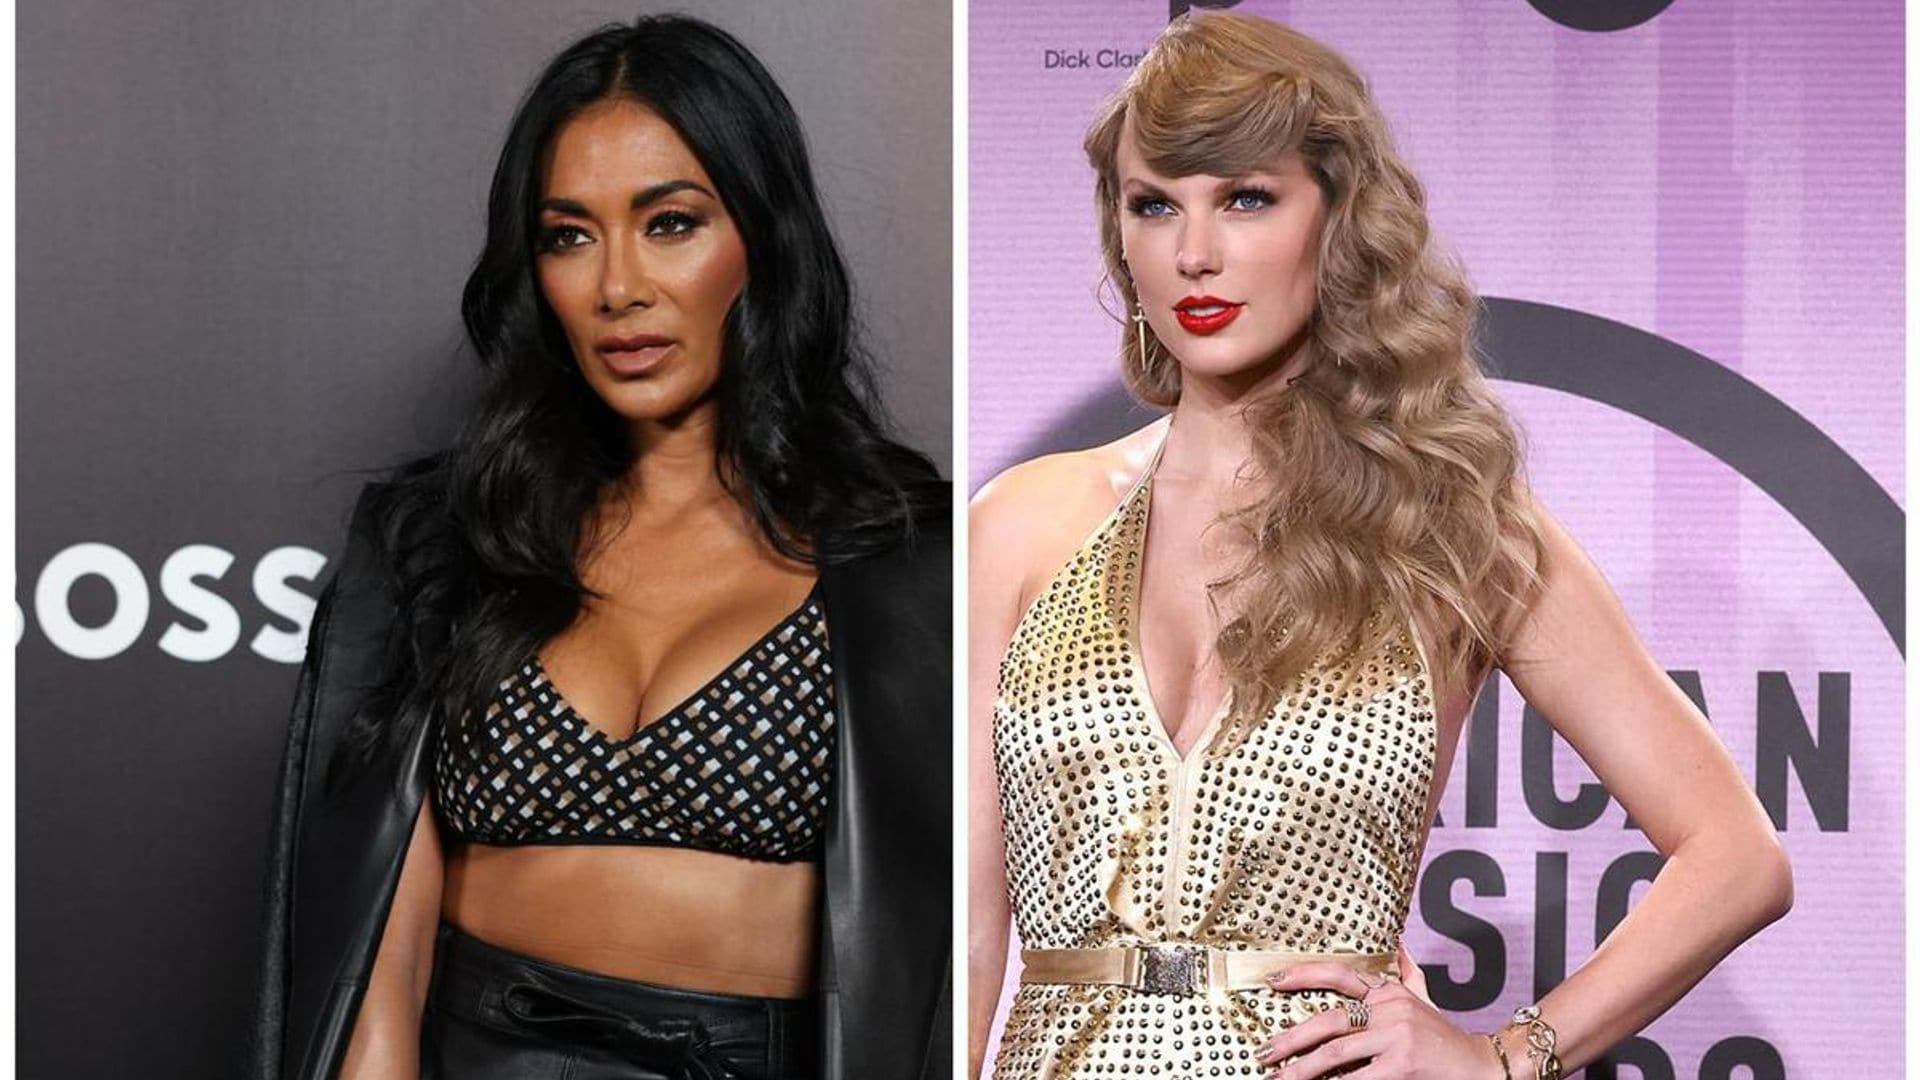 Is Nicole Scherzinger teasing new music collaborating with Taylor Swift?